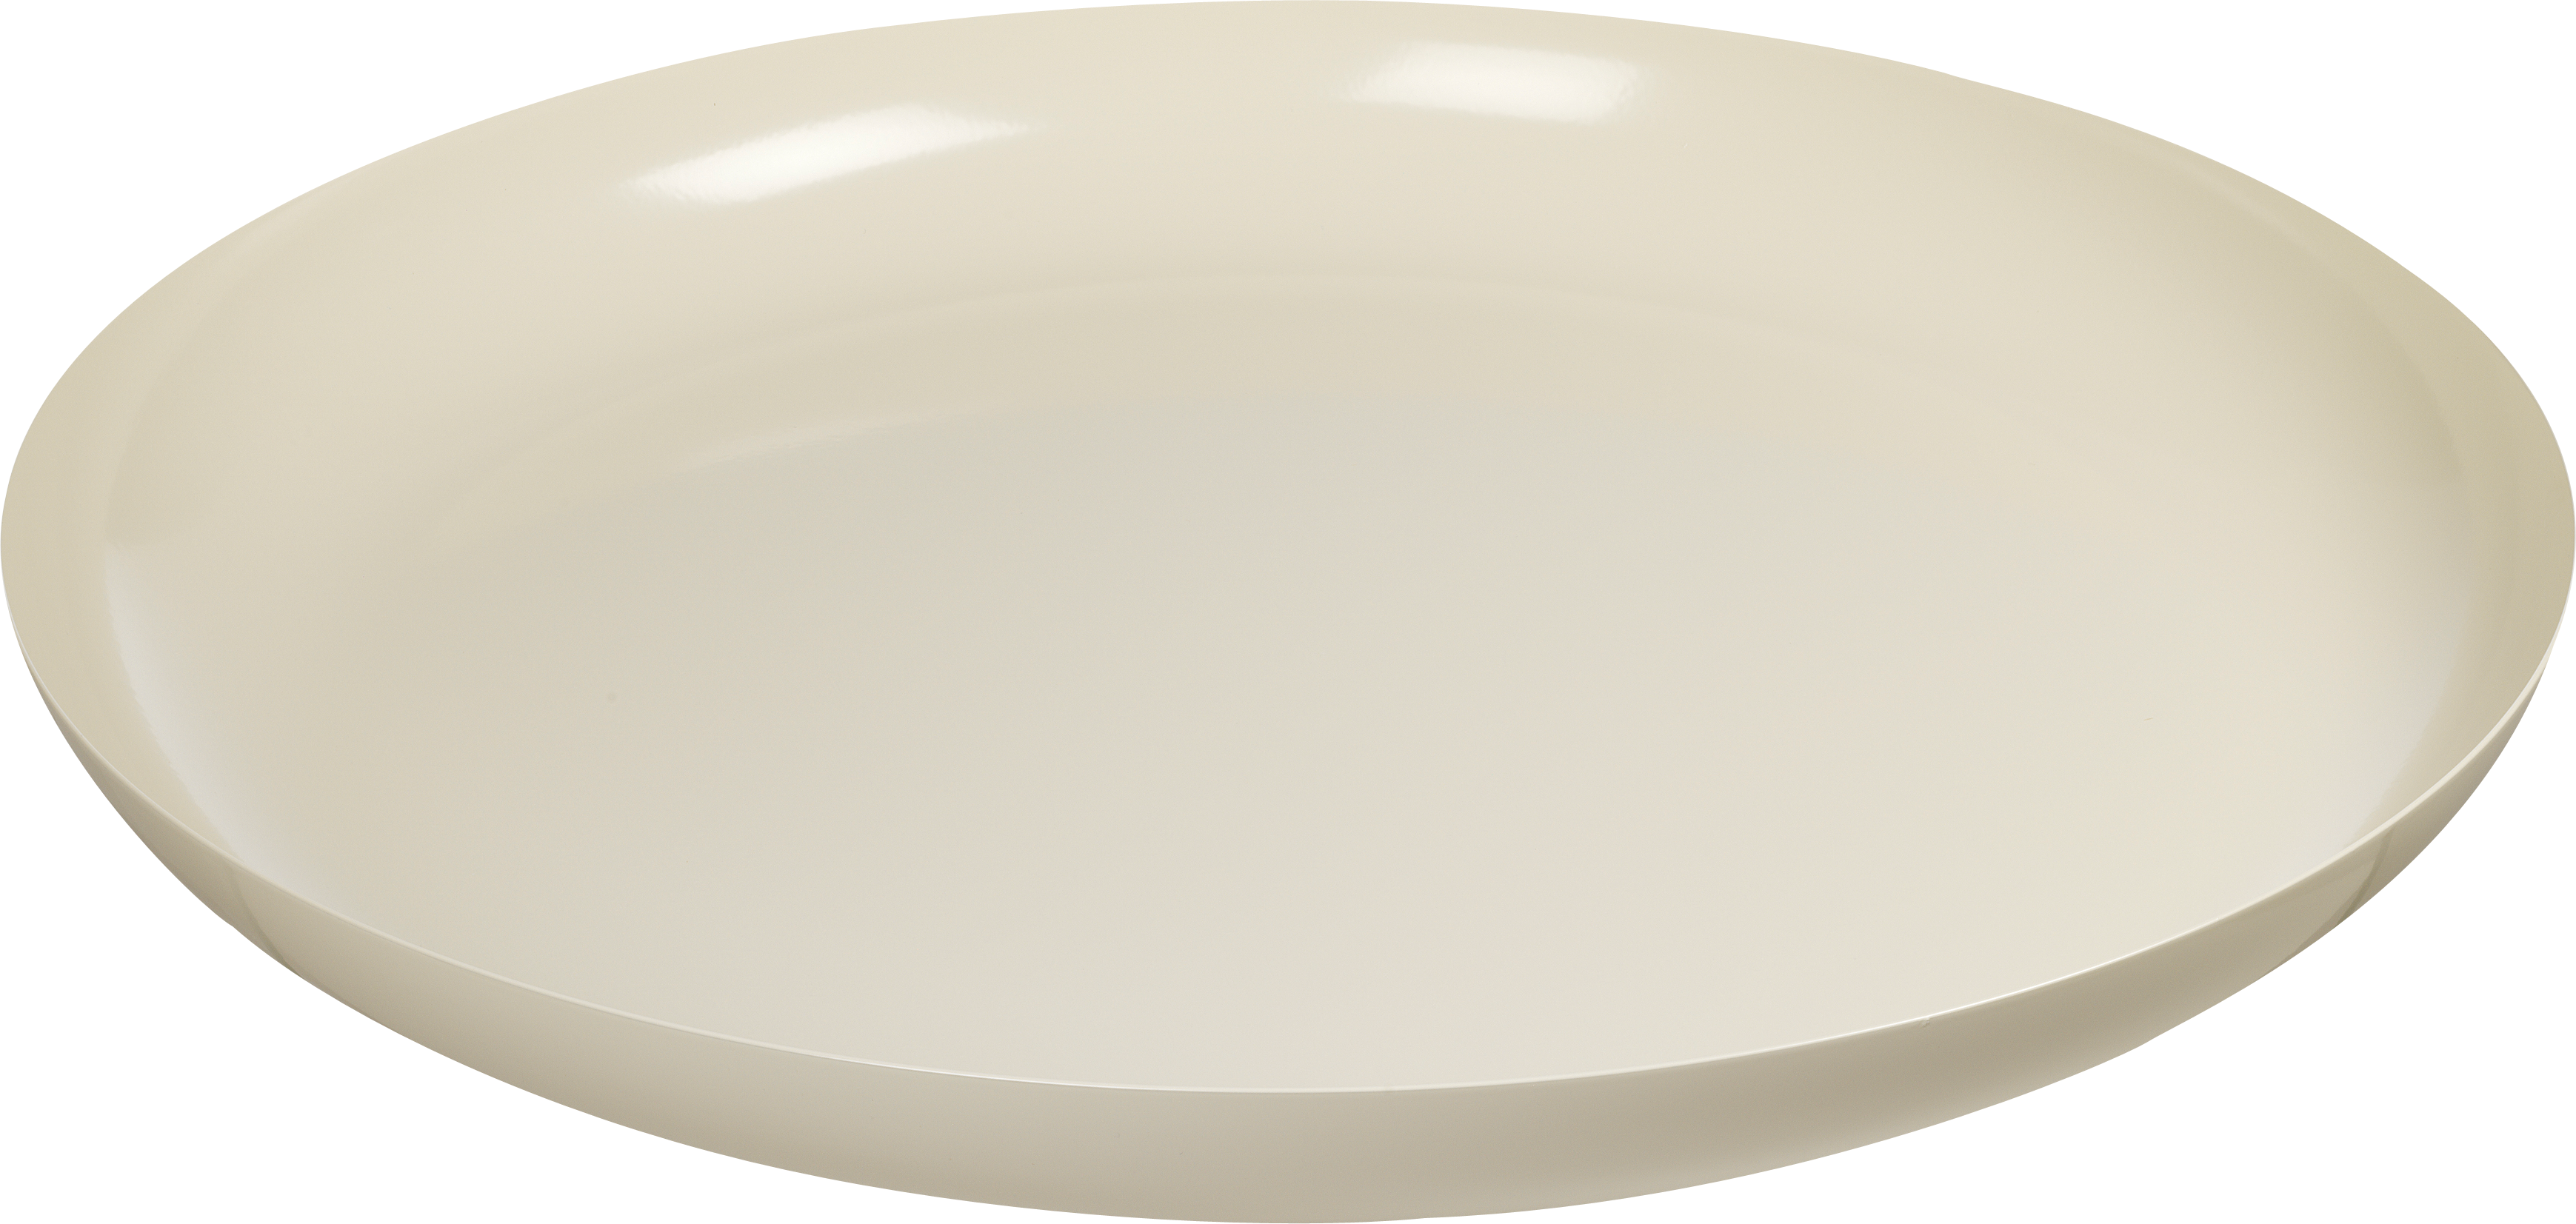 dish clipart plate glass